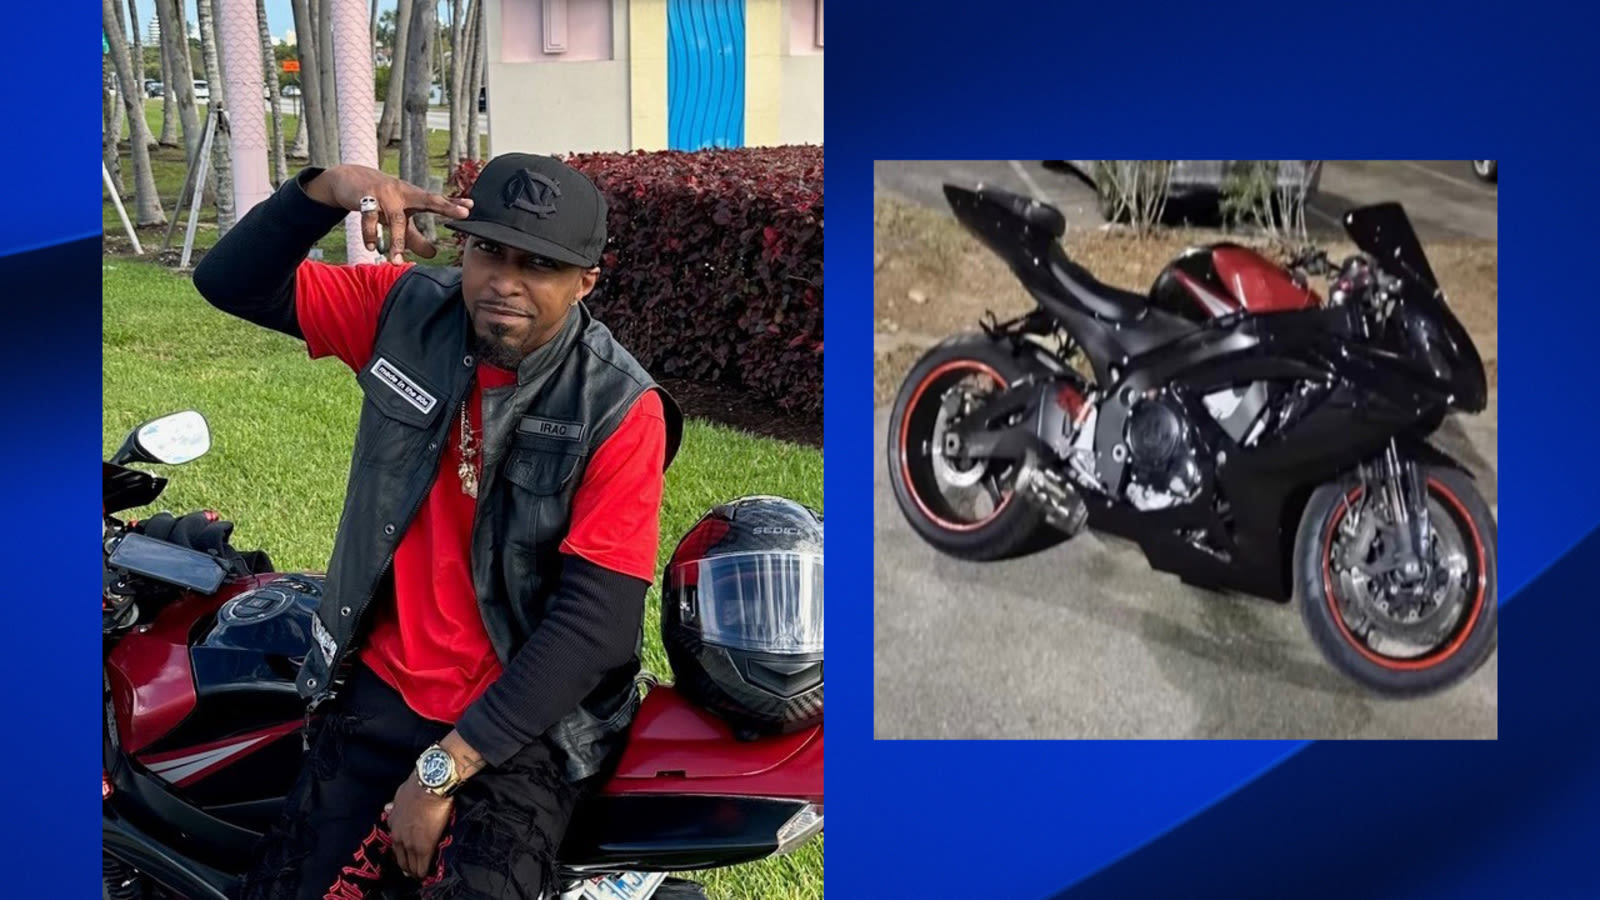 Durham man found dead after being missing for 1 week